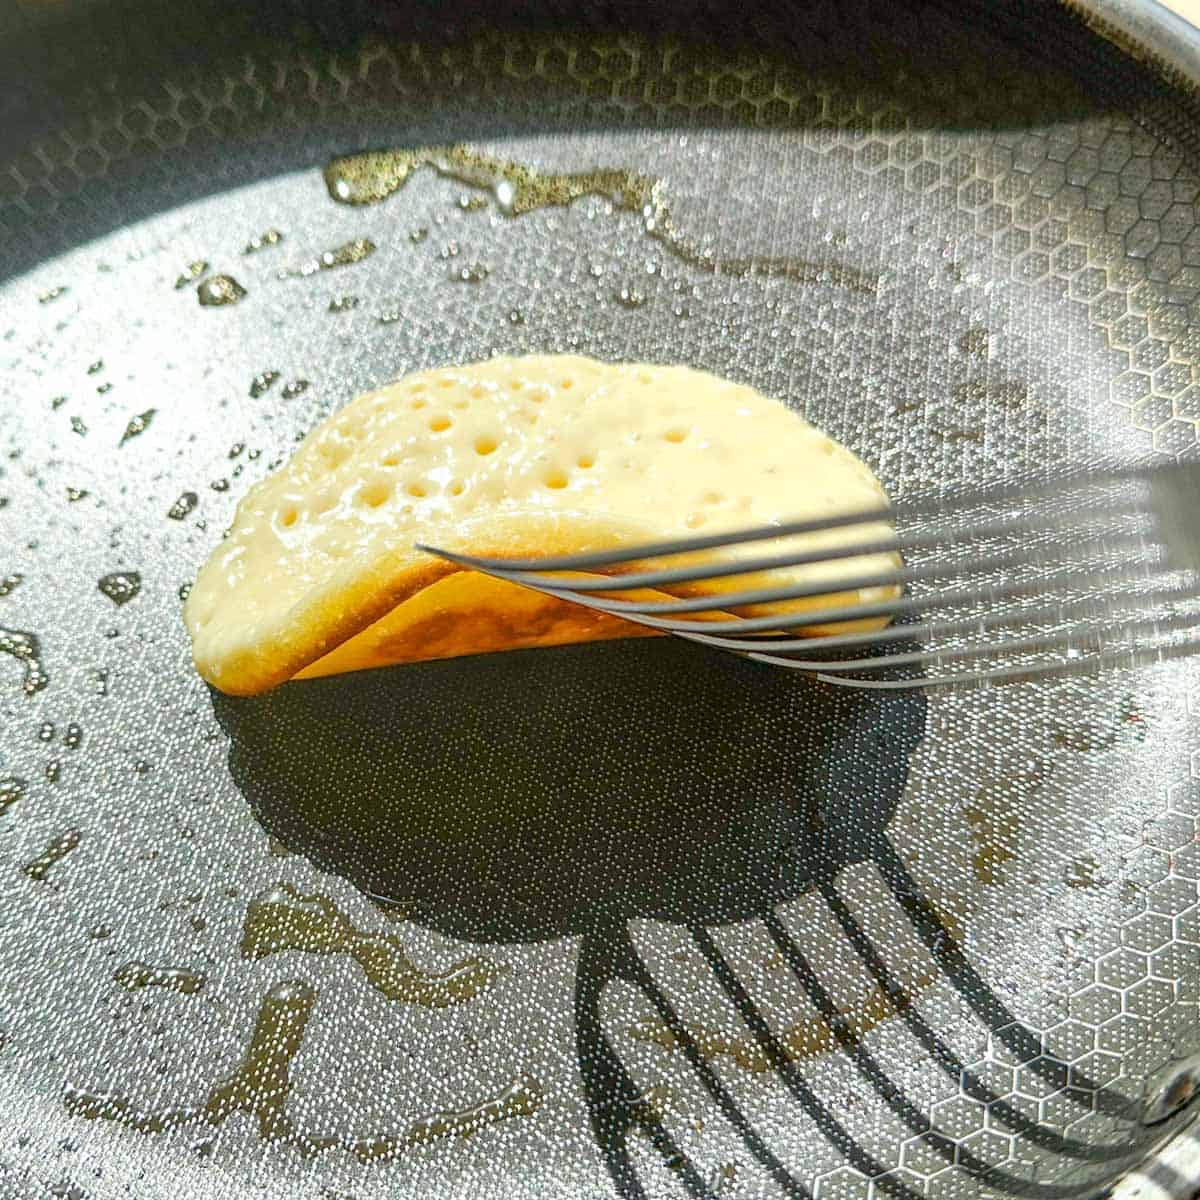 A spatula lifting up a pancake to reveal a golden underside. The top of the pancake has bubbles and is uncooked.